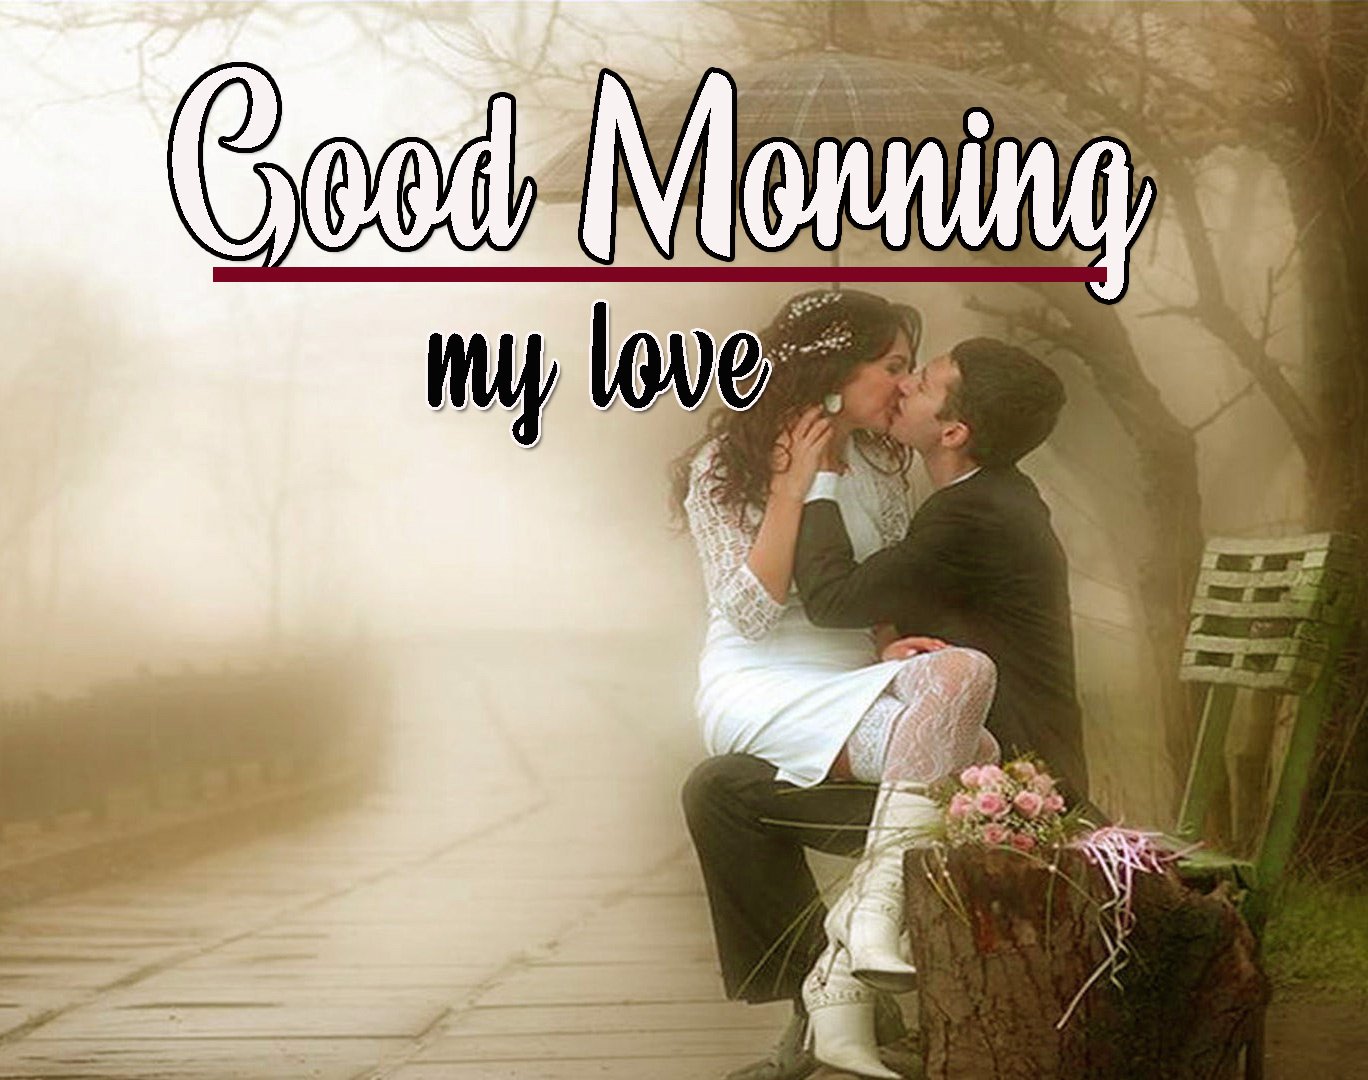 Lover Good Morning Wishes Photo Images for Friend 